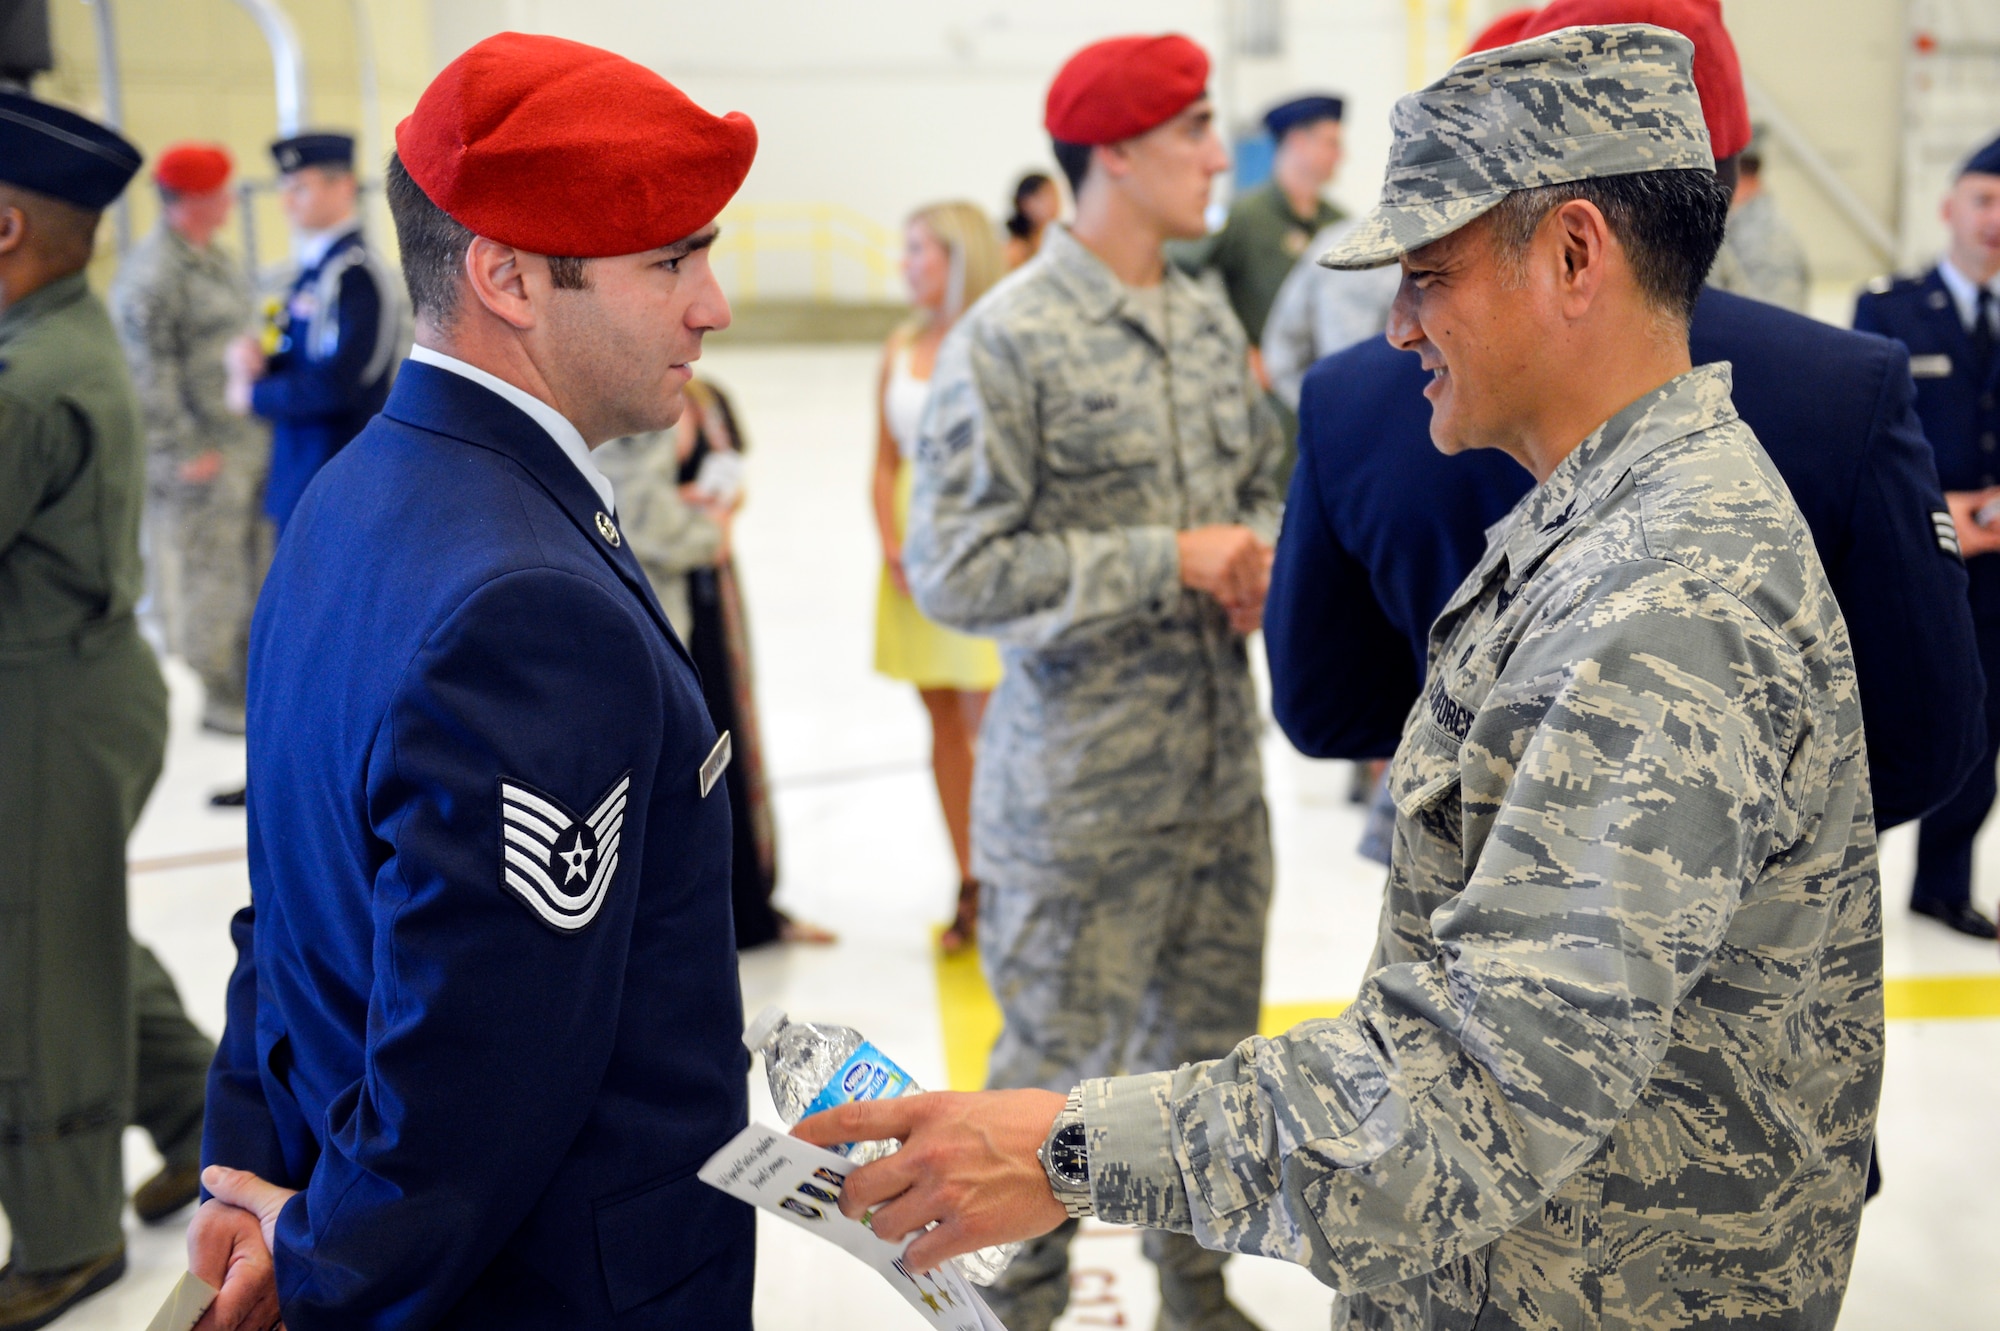 Col. David Kumashiro (right), 62nd Airlift Wing commander, thanks Tech. Sgt. Matthew McKenna, 22nd Special Tactics Squadron combat controller, for his service and actions in combat, which earned him the Silver Star, during the 22nd STS awards ceremony Aug. 18,2014, at Joint Base Lewis-McChord, Wash. McKenna is the 31st special tactics Airman to receive the medal since the 9/11 terrorist attacks. (U.S. Air Force photo/Staff Sgt. Russ Jackson)